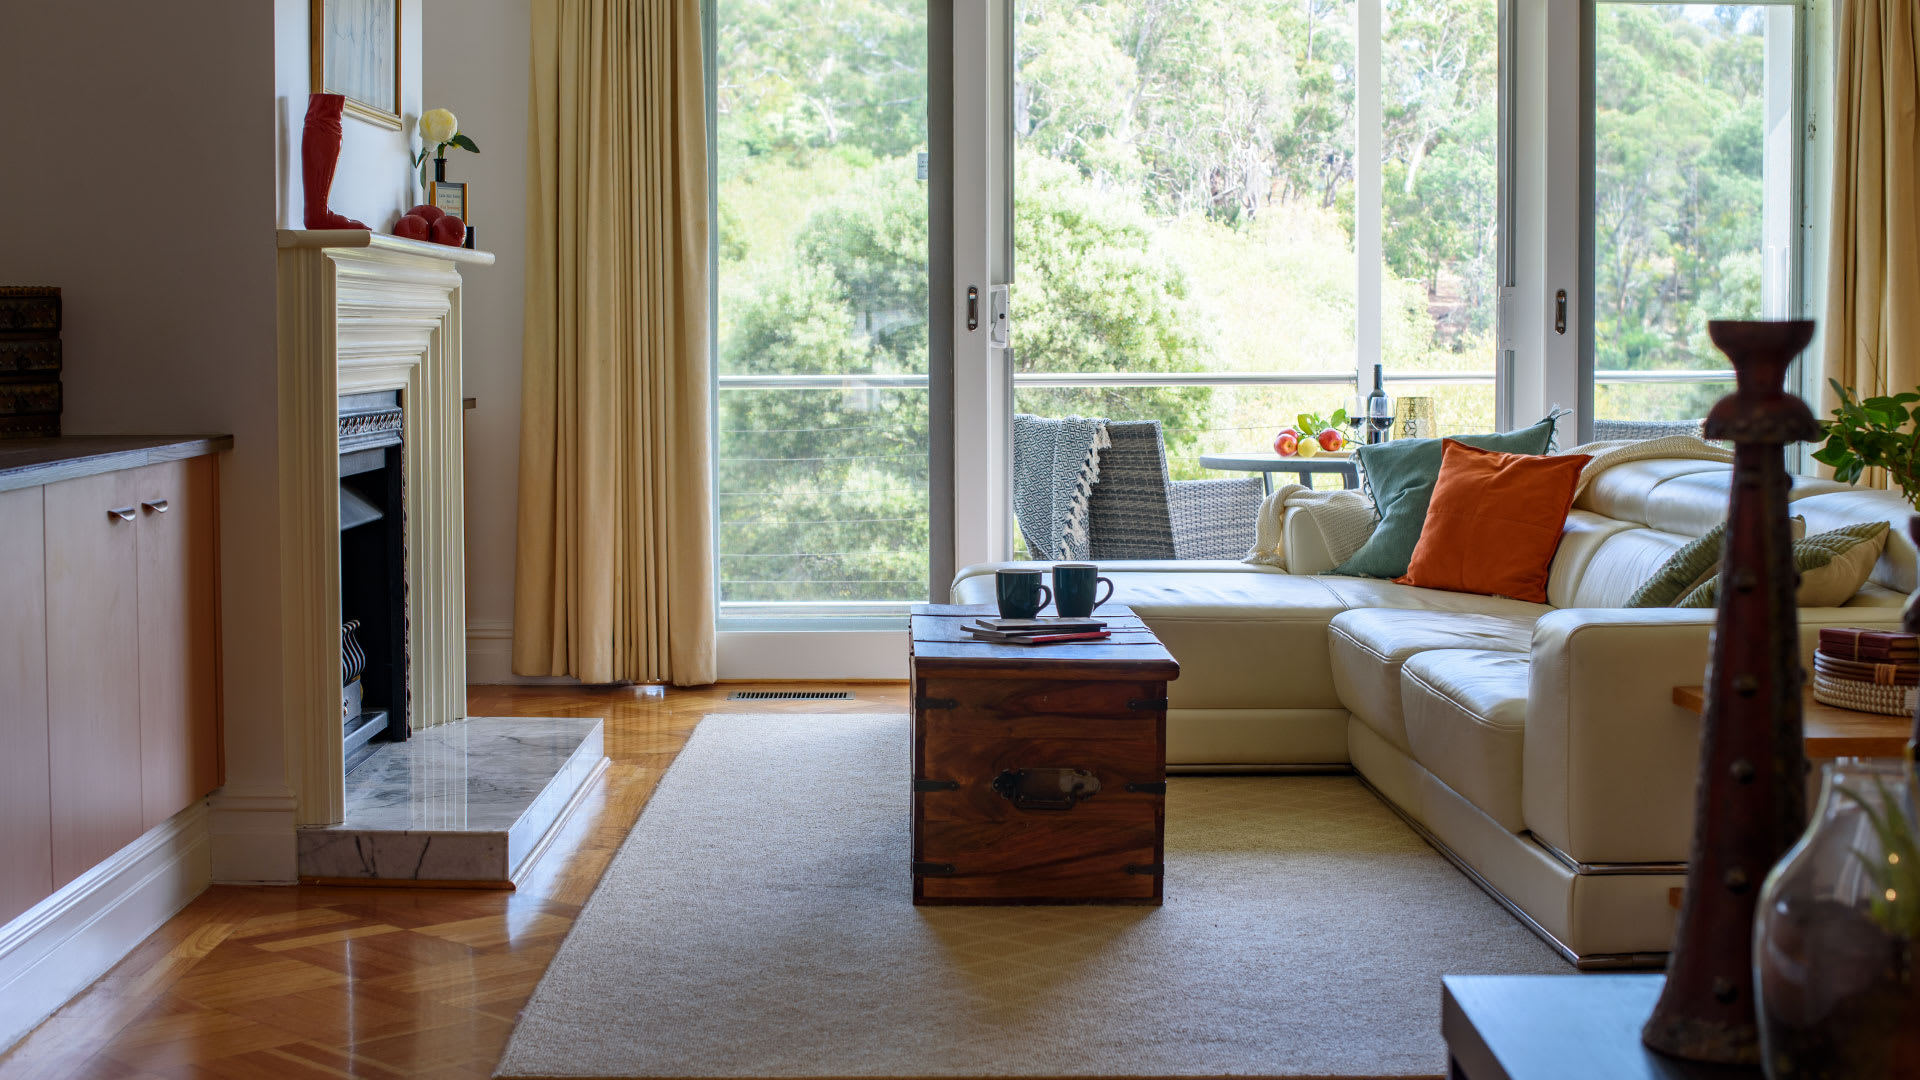 Lakeside Suite 4 | Daylesford | Image 006